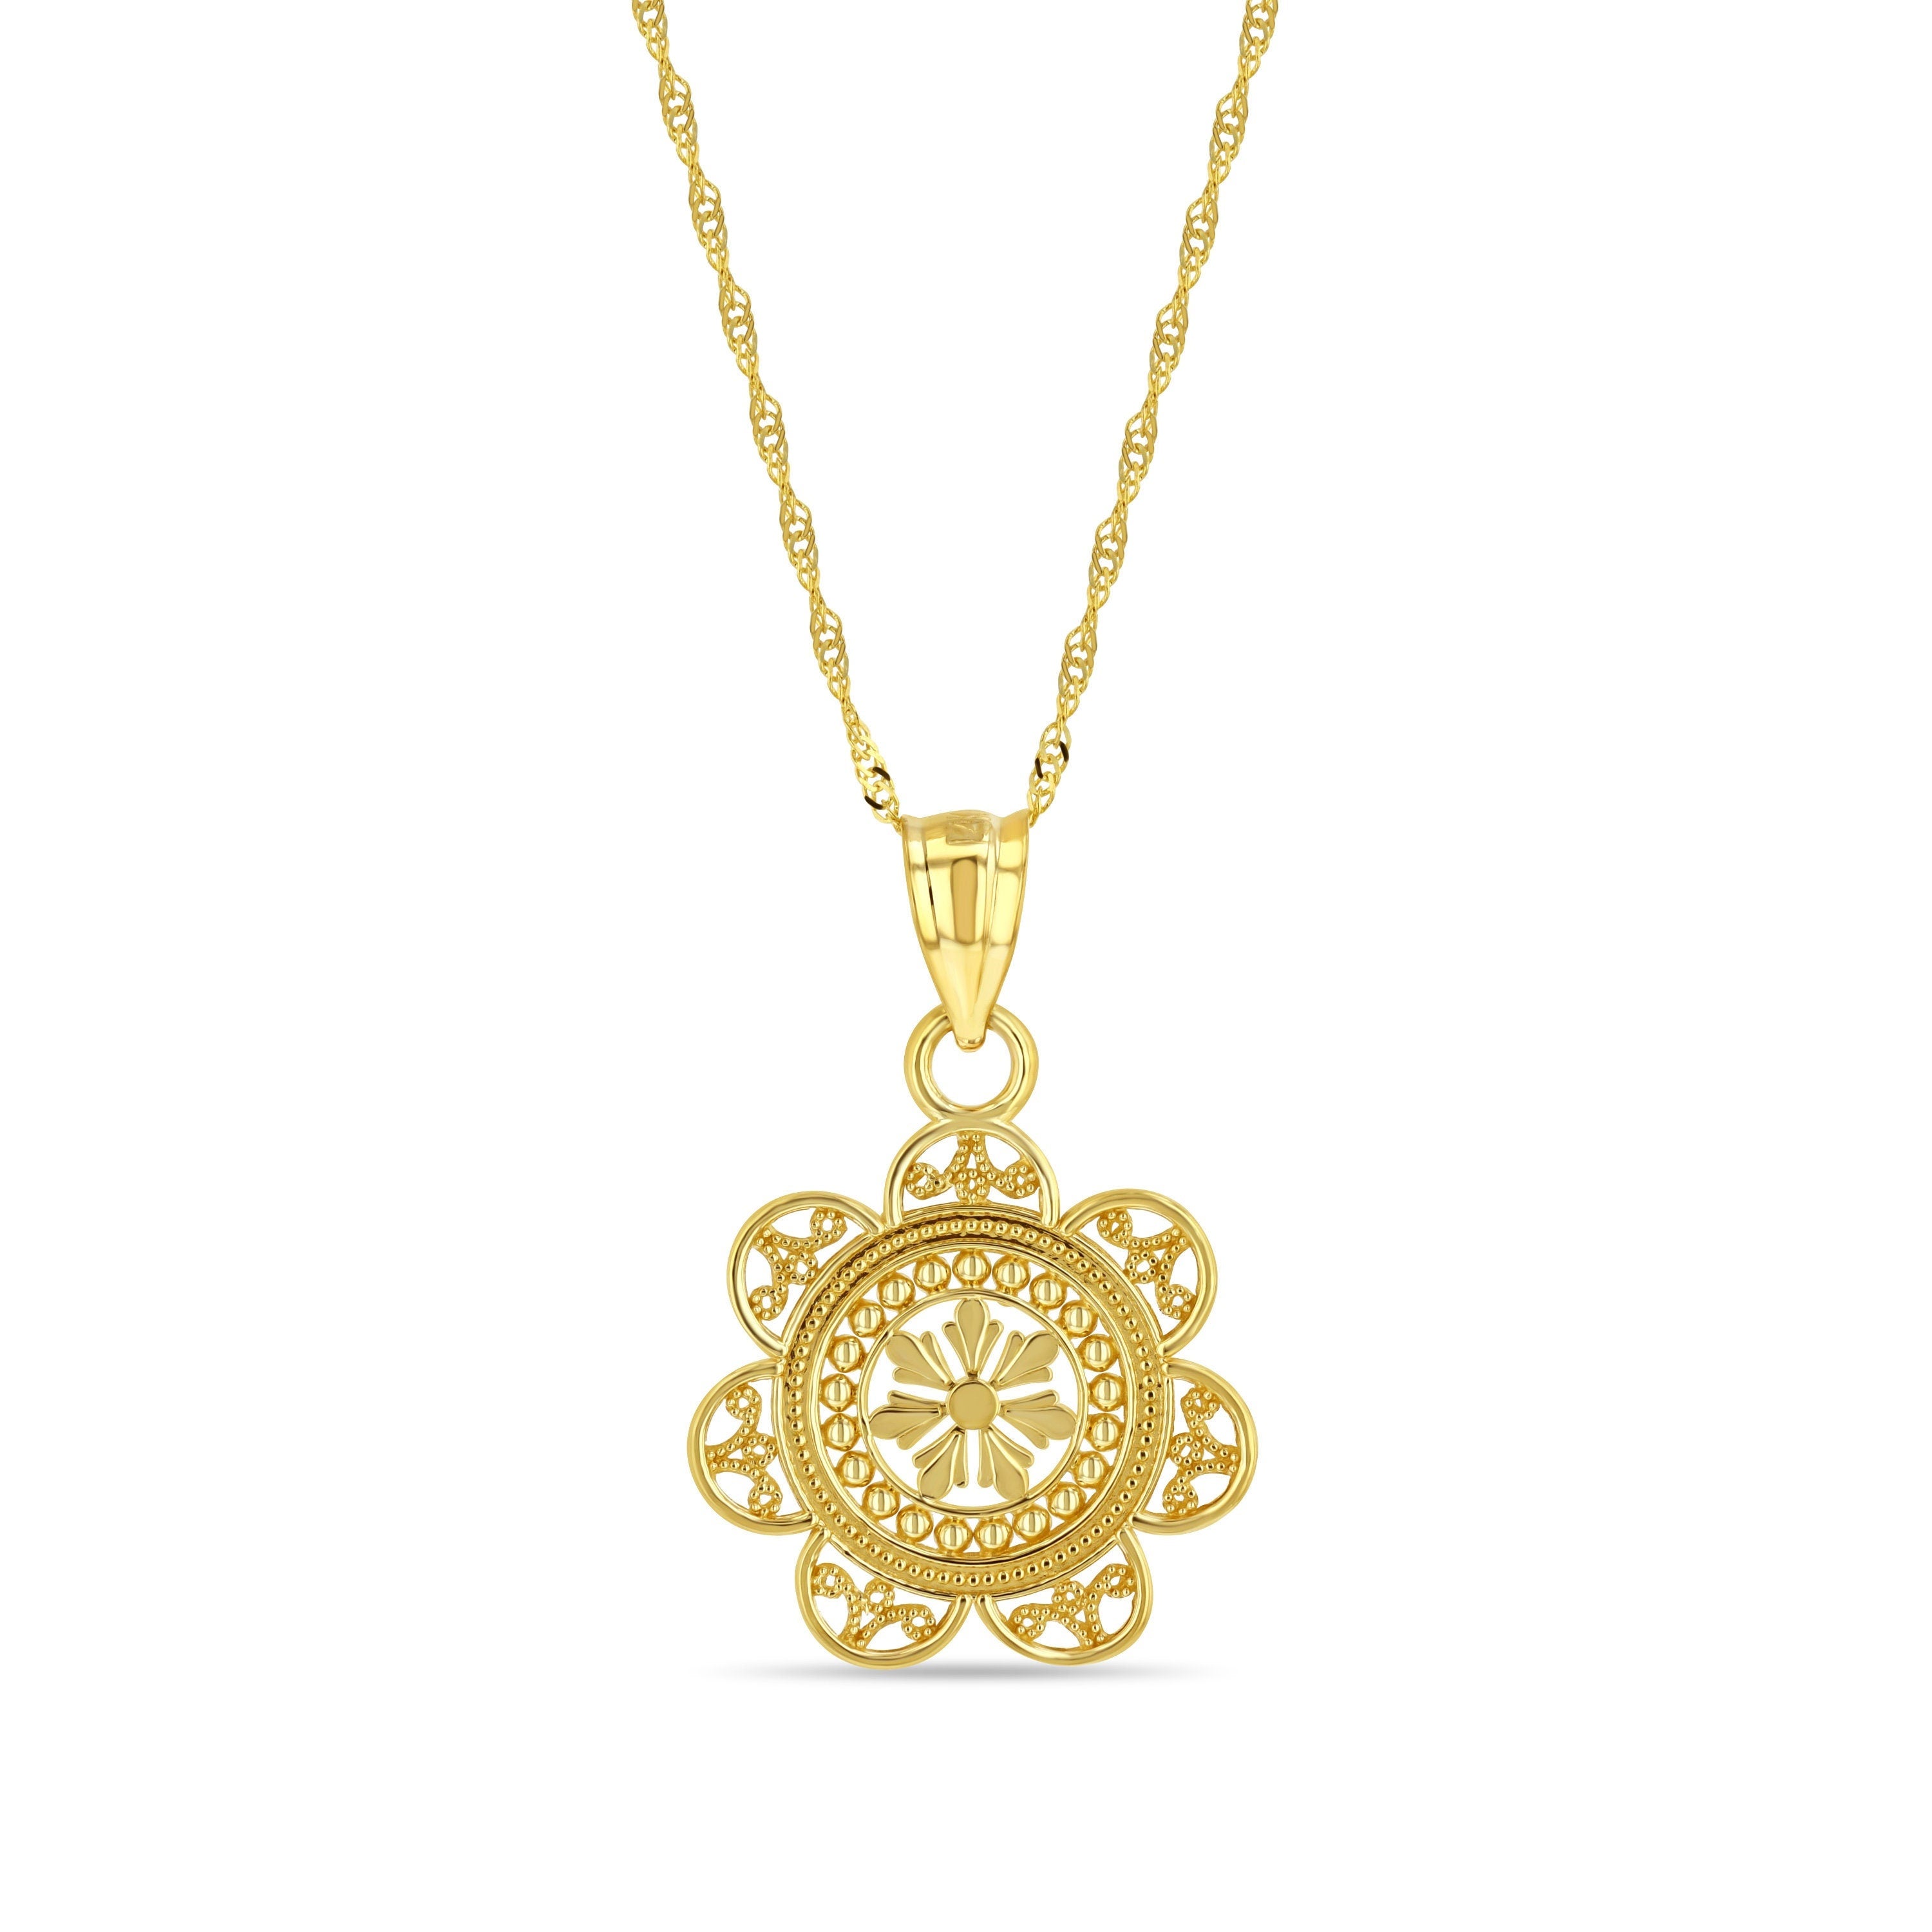 14k solid gold lace flower pendant on 18" solid gold chain